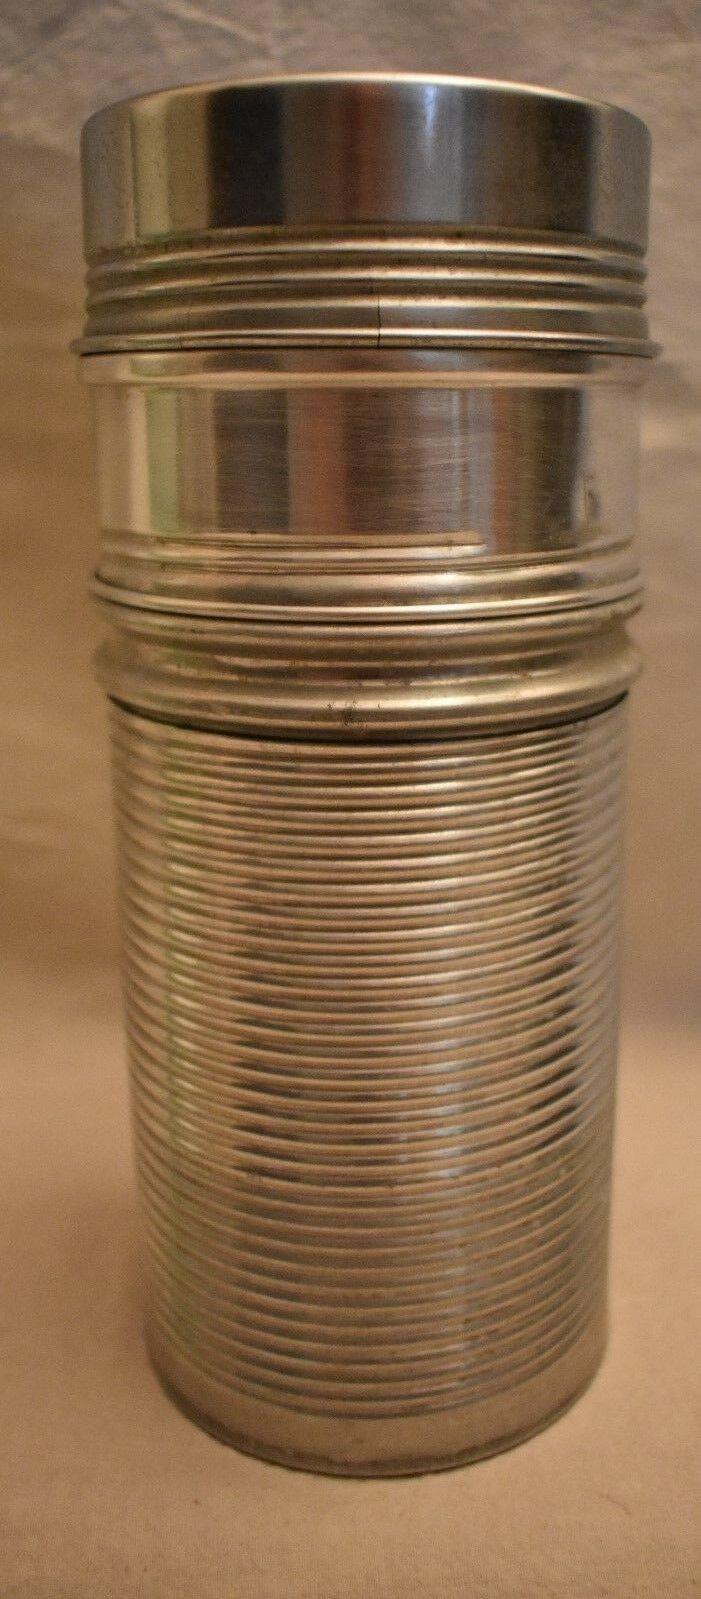 Thermos Brand Insul-Pak Model 9921 Metal thermos 7 3/8 inches tall Made in USA